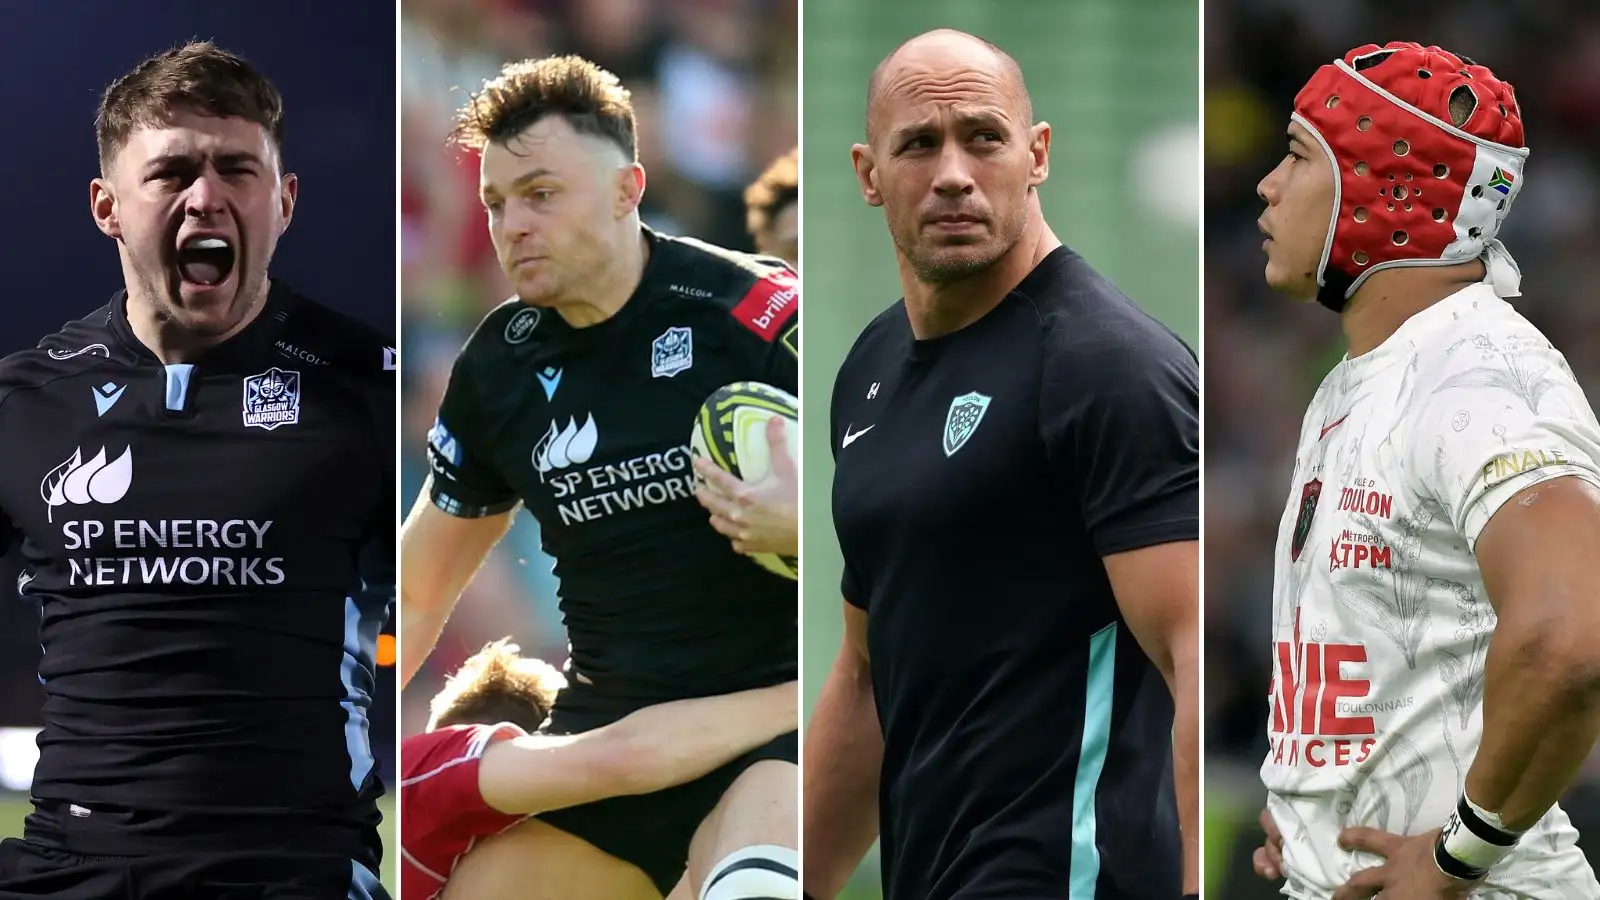 Five key head to heads to keen an eye on during the Challenge Cup final between the Glasgow Warriors and Toulon at the Aviva Stadium.